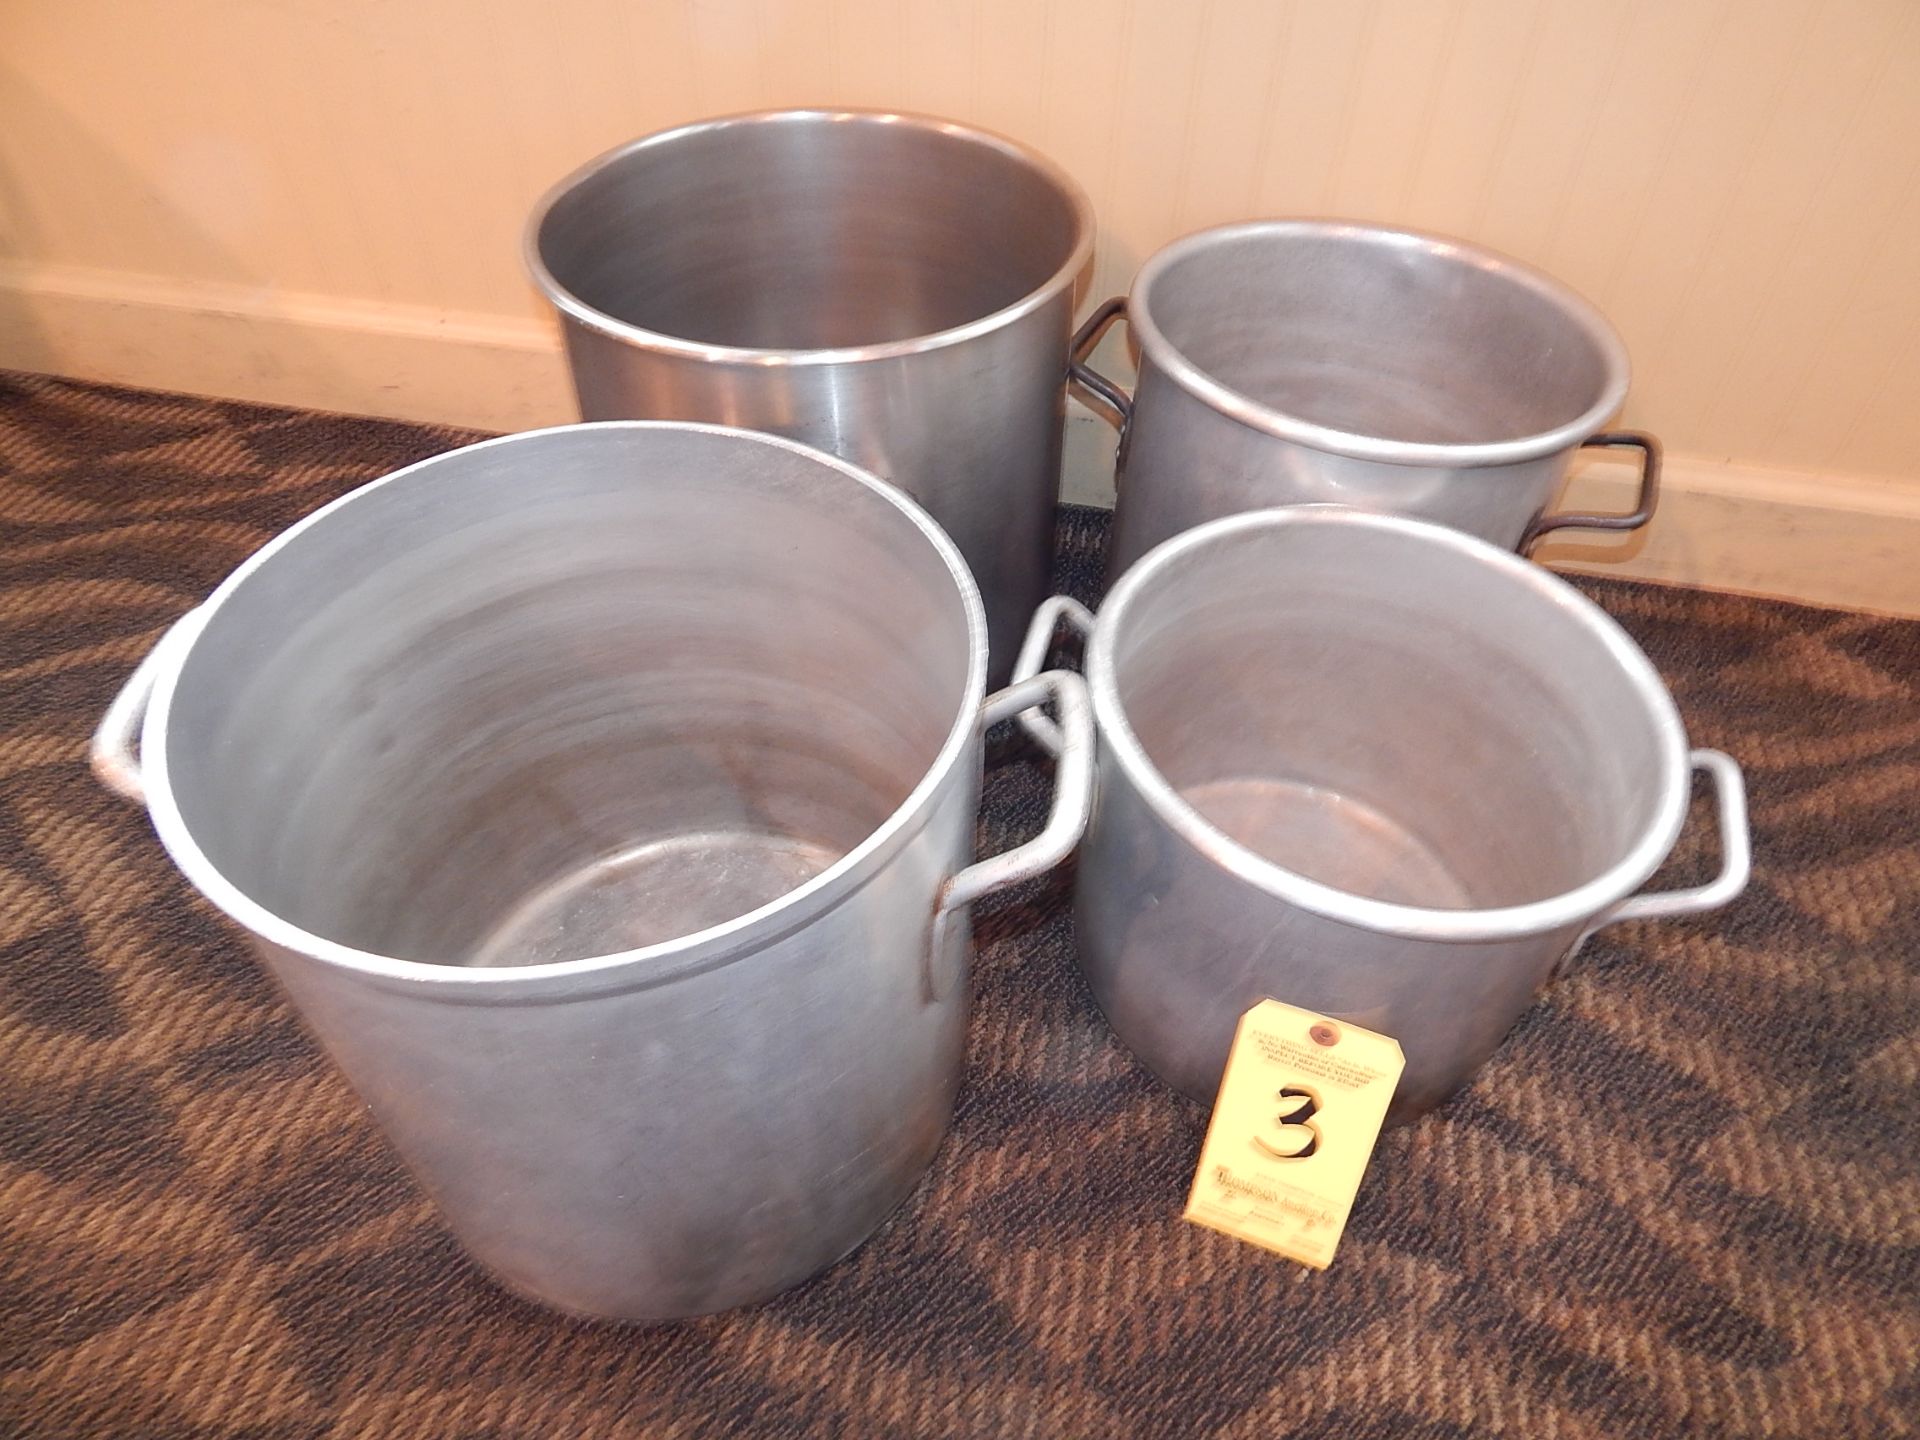 (3) Aluminum Pots and (1) Stainless Steel Pot